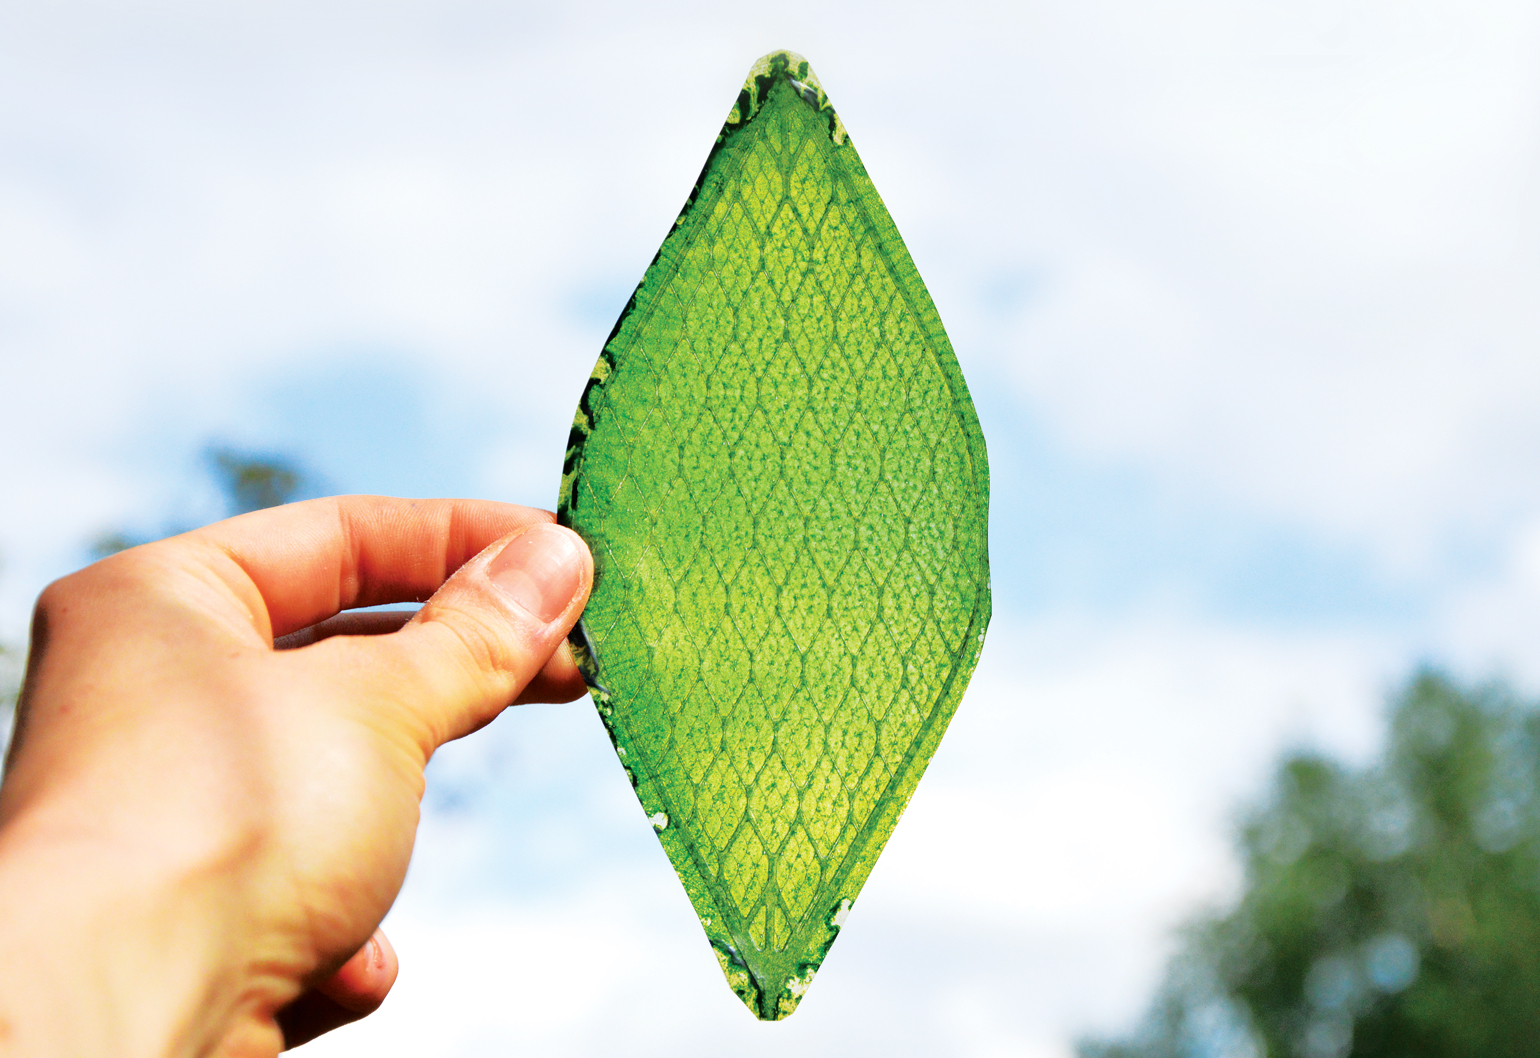 Artificial Leaf Technology could one Day Power our World